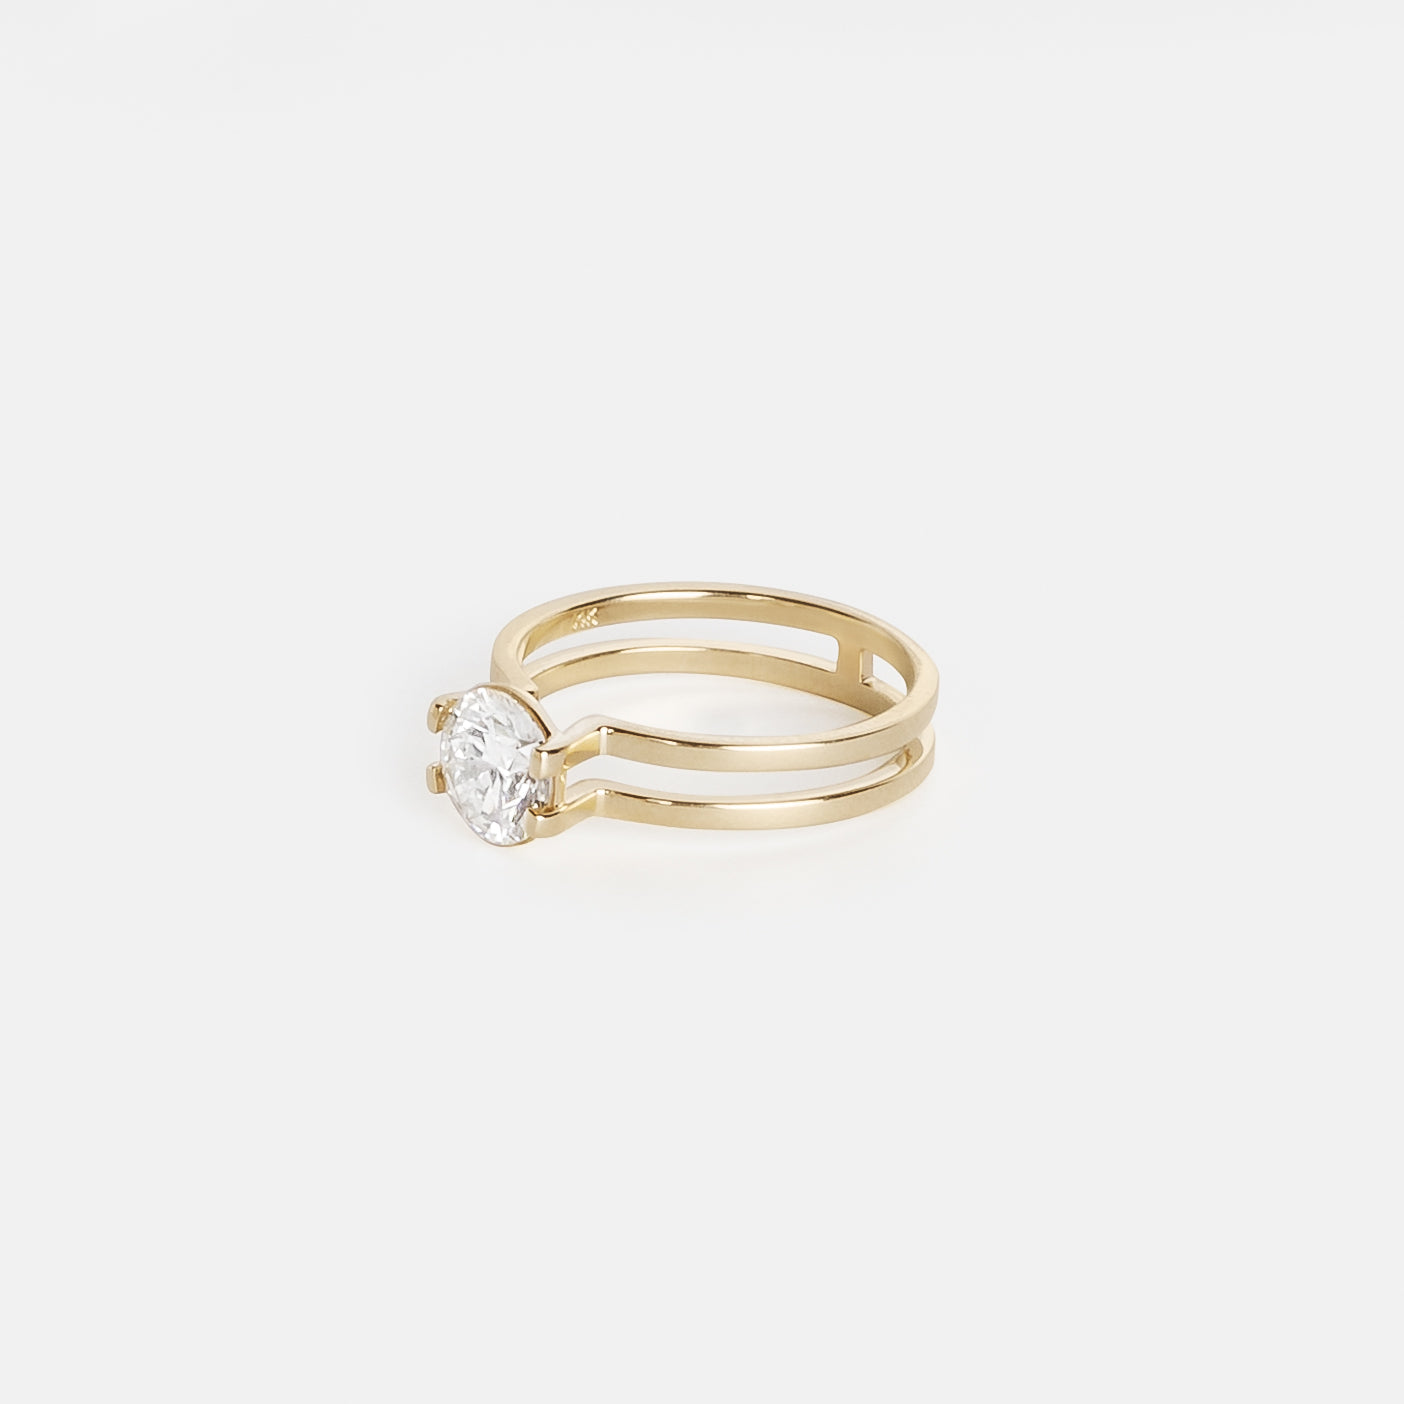 Vedi Cool Ring in 14k Gold set with a 1.01ct round brilliant cut lab-grown diamond By SHW Fine Jewelry NYC